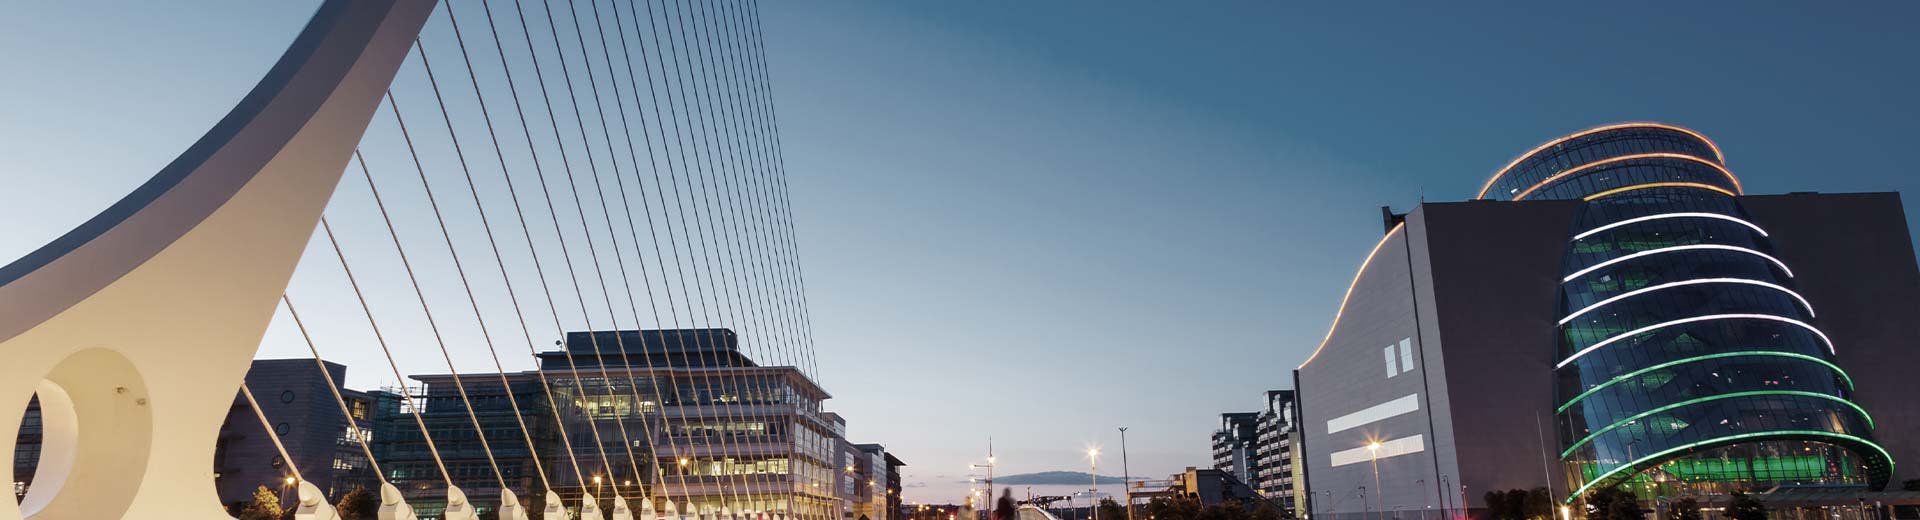 Commercial buildings and a modern bridge during a darker part of the day in Dublin.